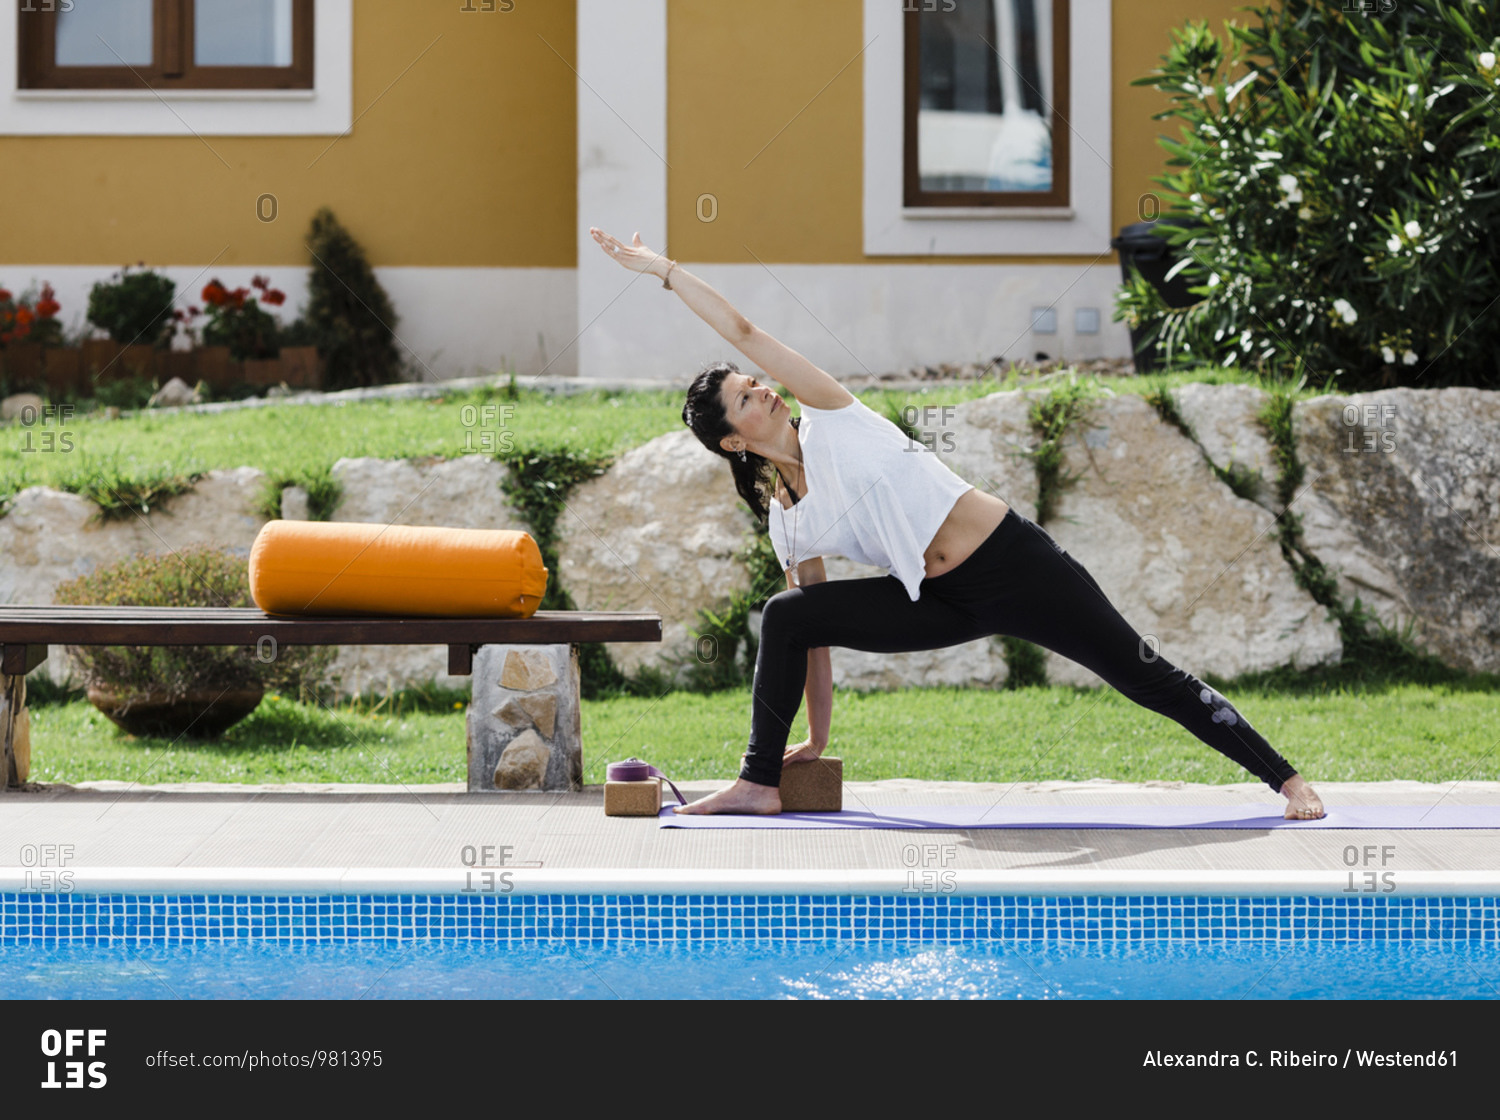 Mature woman practicing triangle position at poolside against house in yard